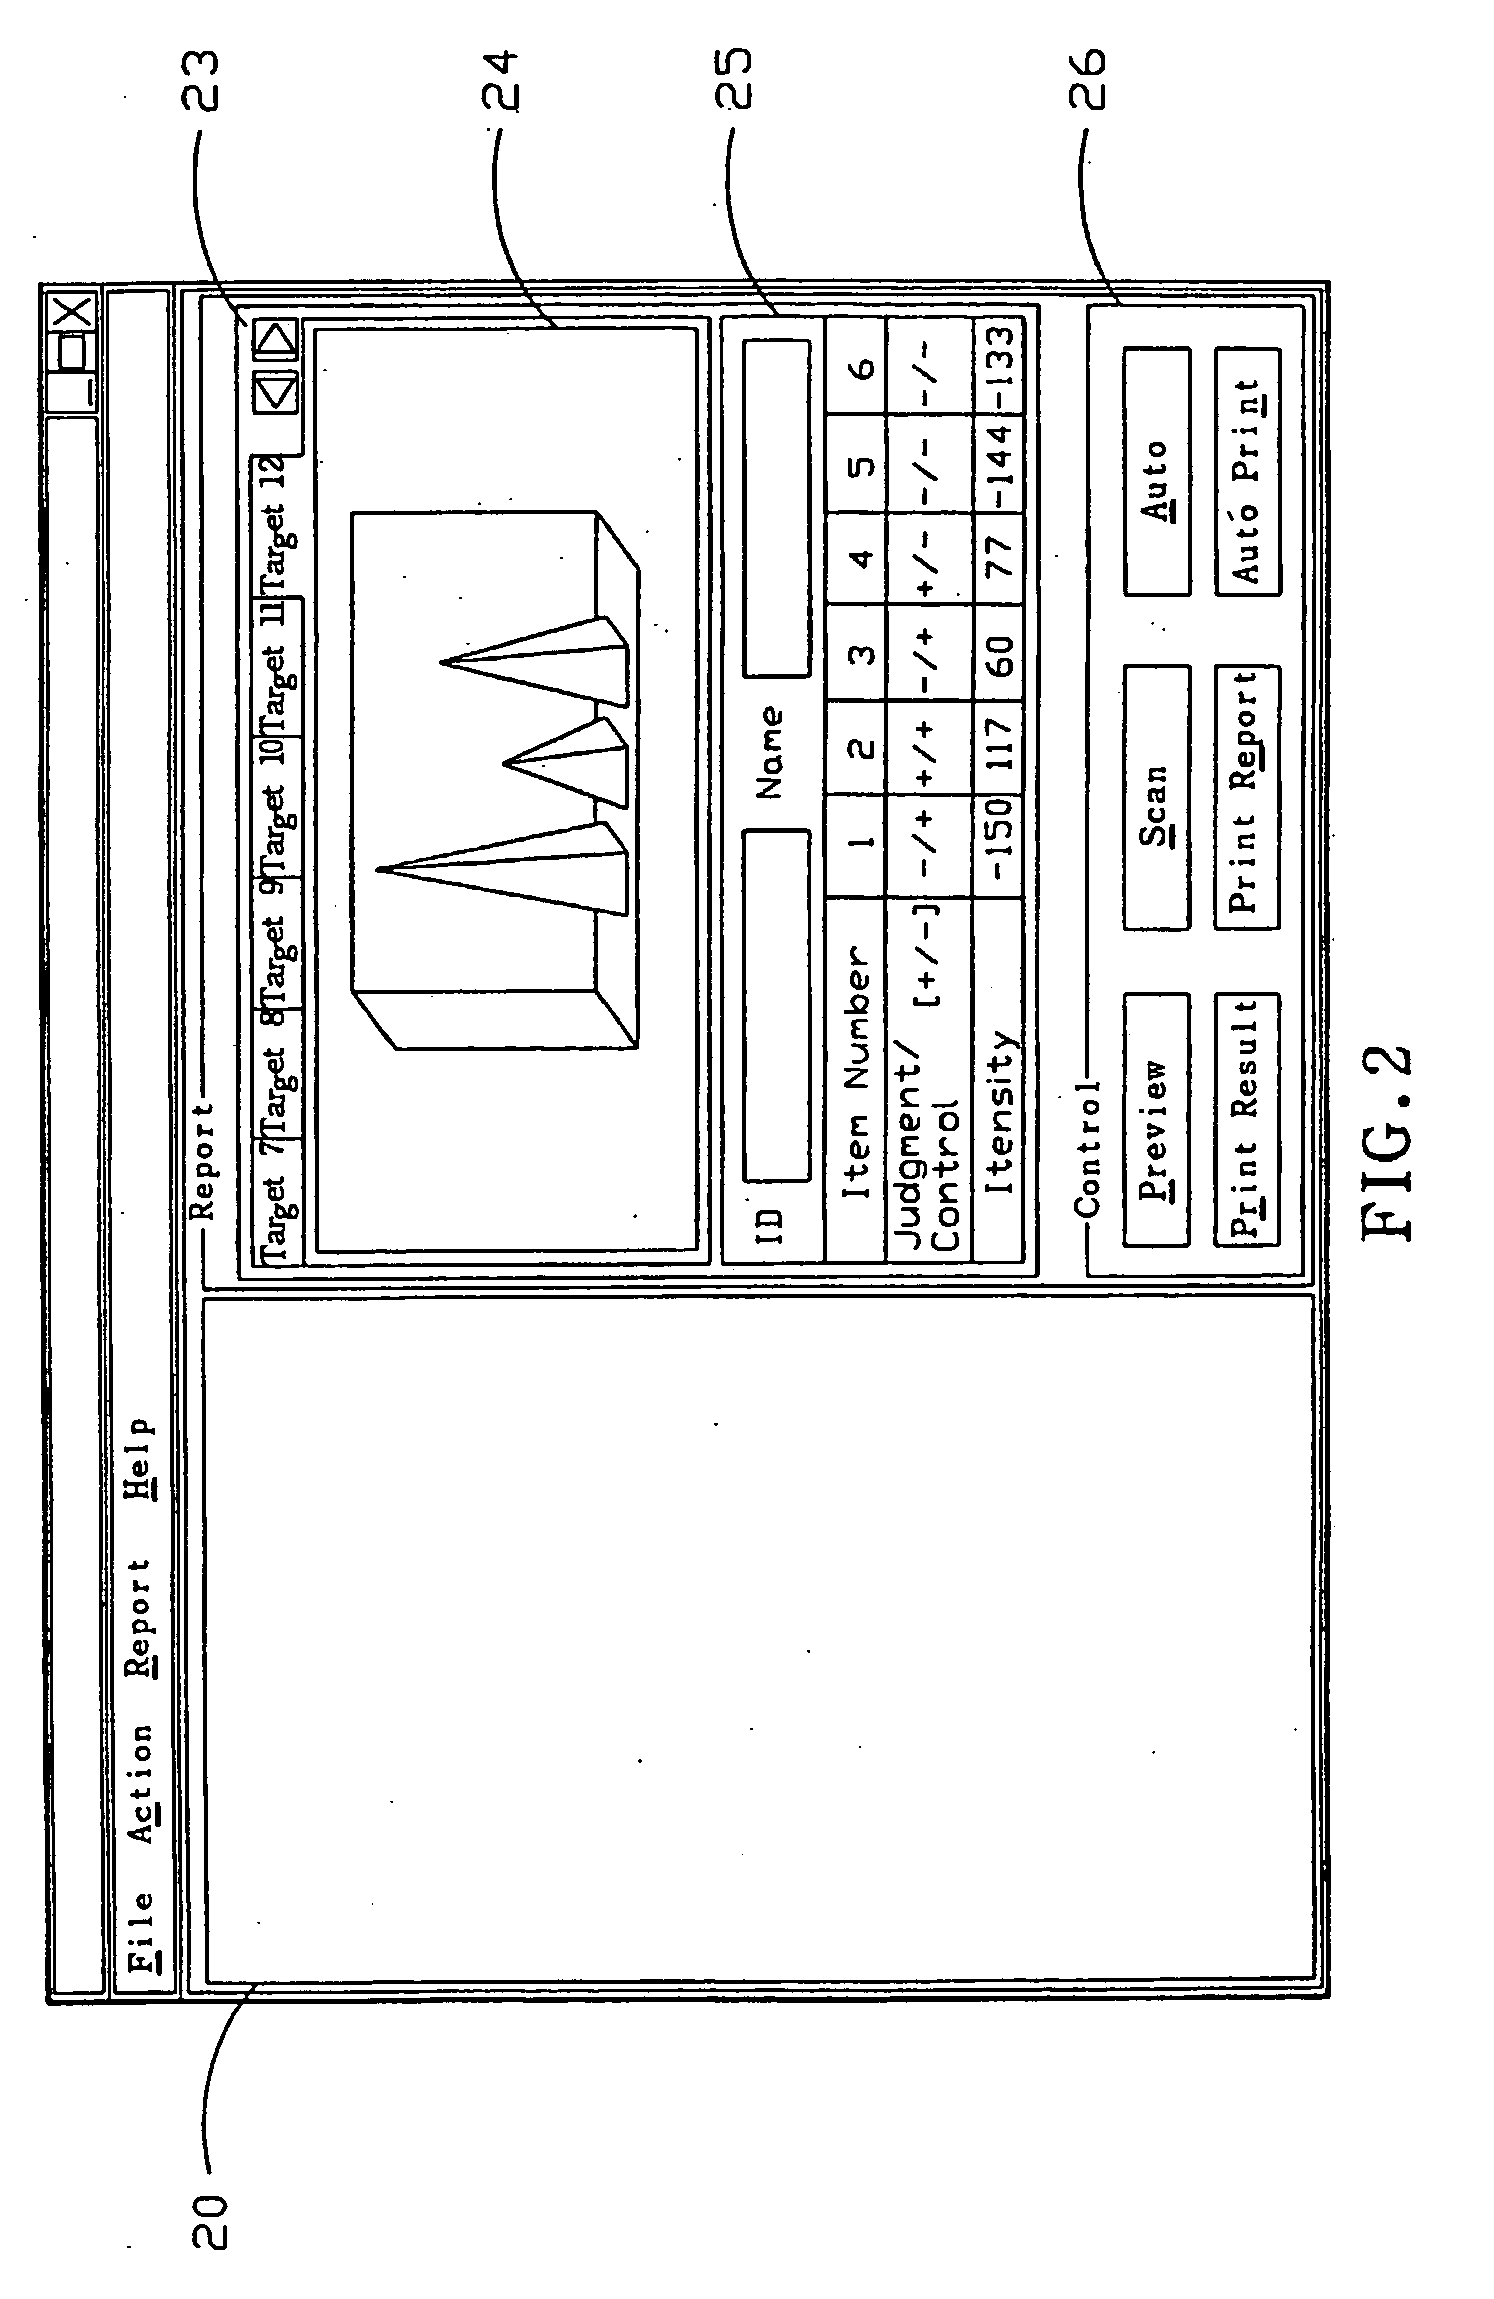 Method of automatically detecting a test result of a probe zone of a test strip